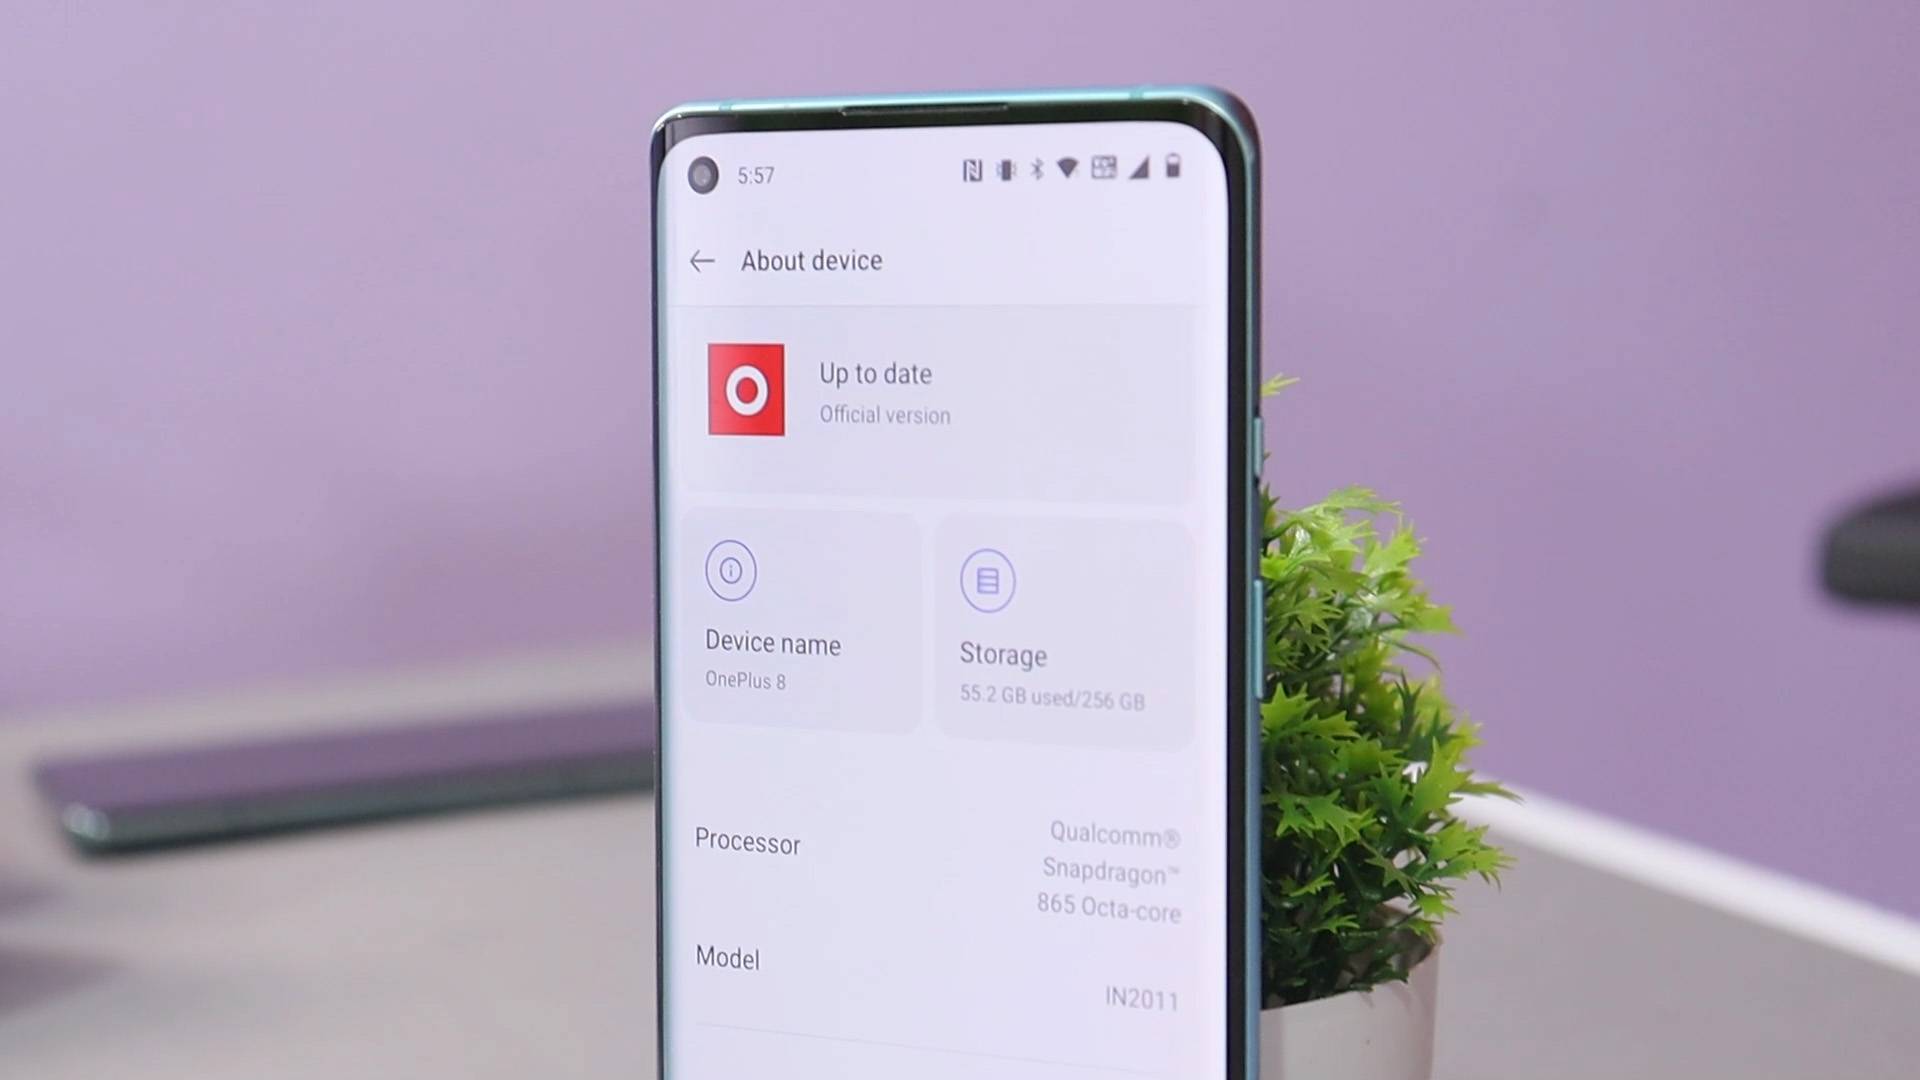 For the OnePlus 9R, OnePlus 8T, and OnePlus 8 series, OnePlus releases OxygenOS 12.1 C.35